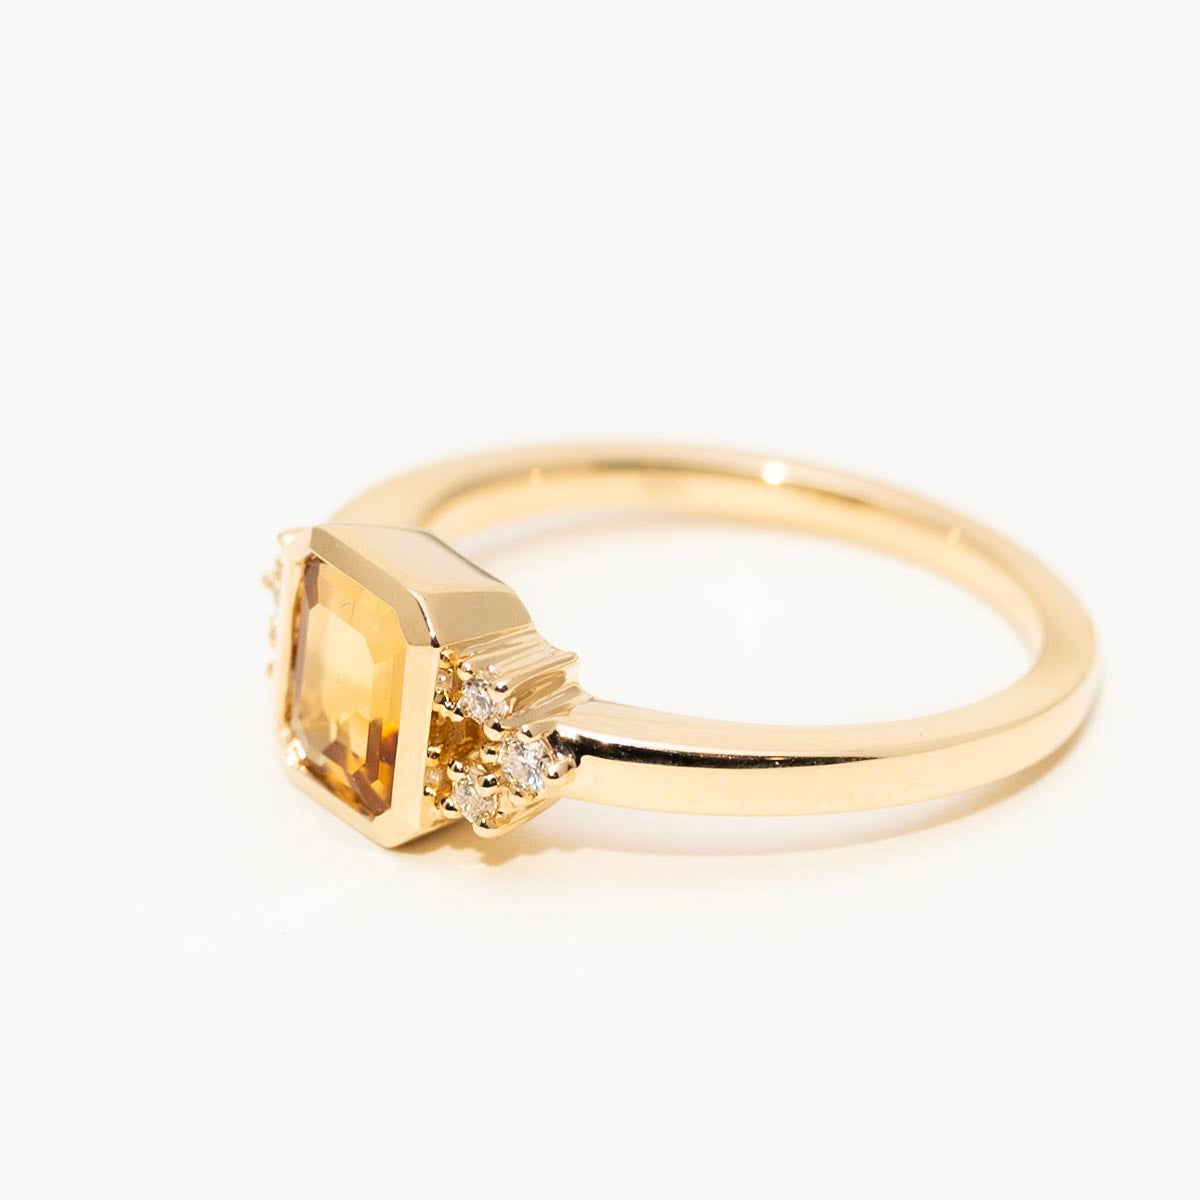 Emerald Cut Citrine Ring in 14kt Yellow Gold  with Diamonds (1/10ct tw)